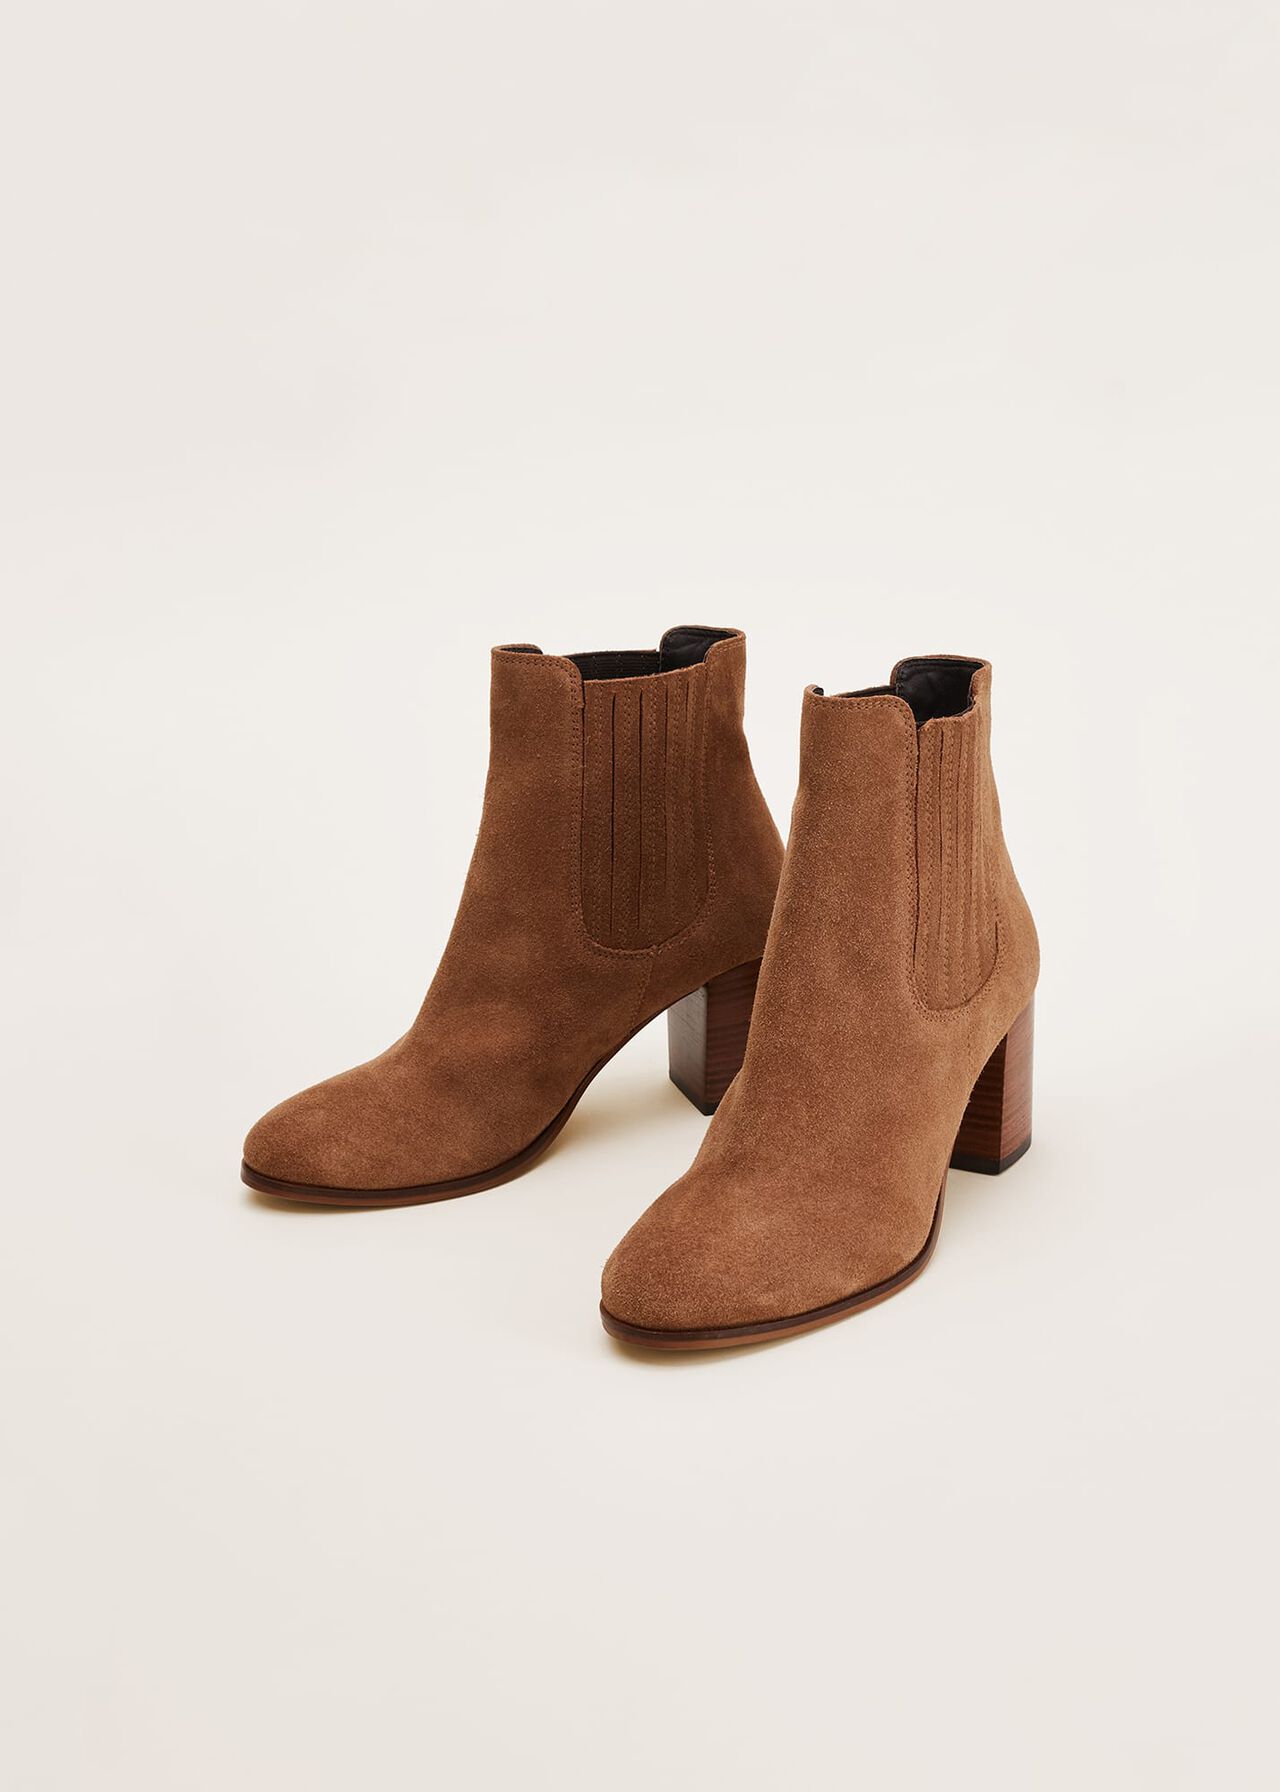 Camila Tan Suede Ankle Boots